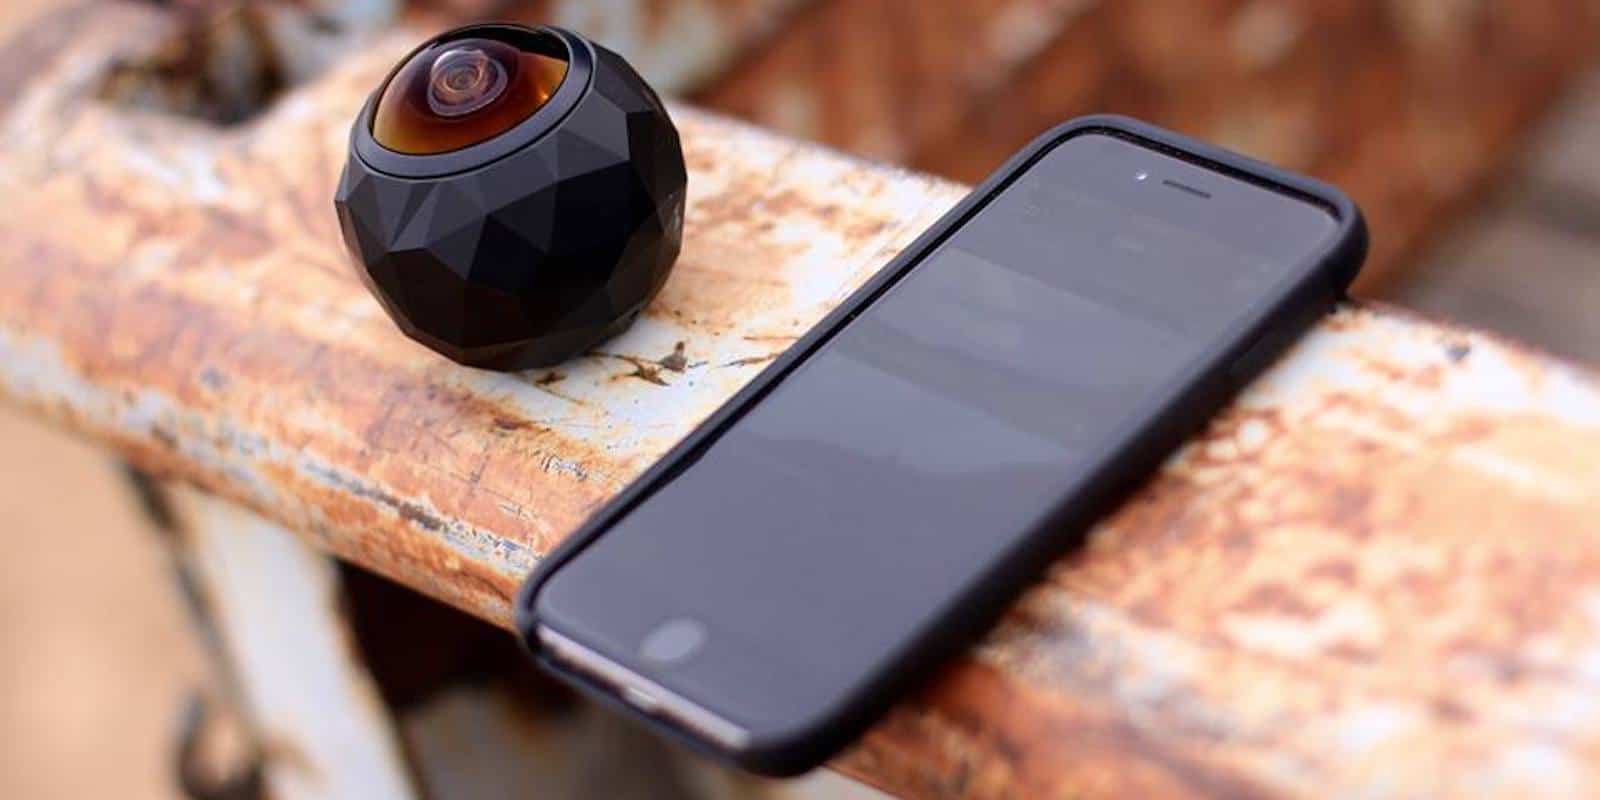 Get in on the immersive video fun with this handheld, durable 360 degree camera.